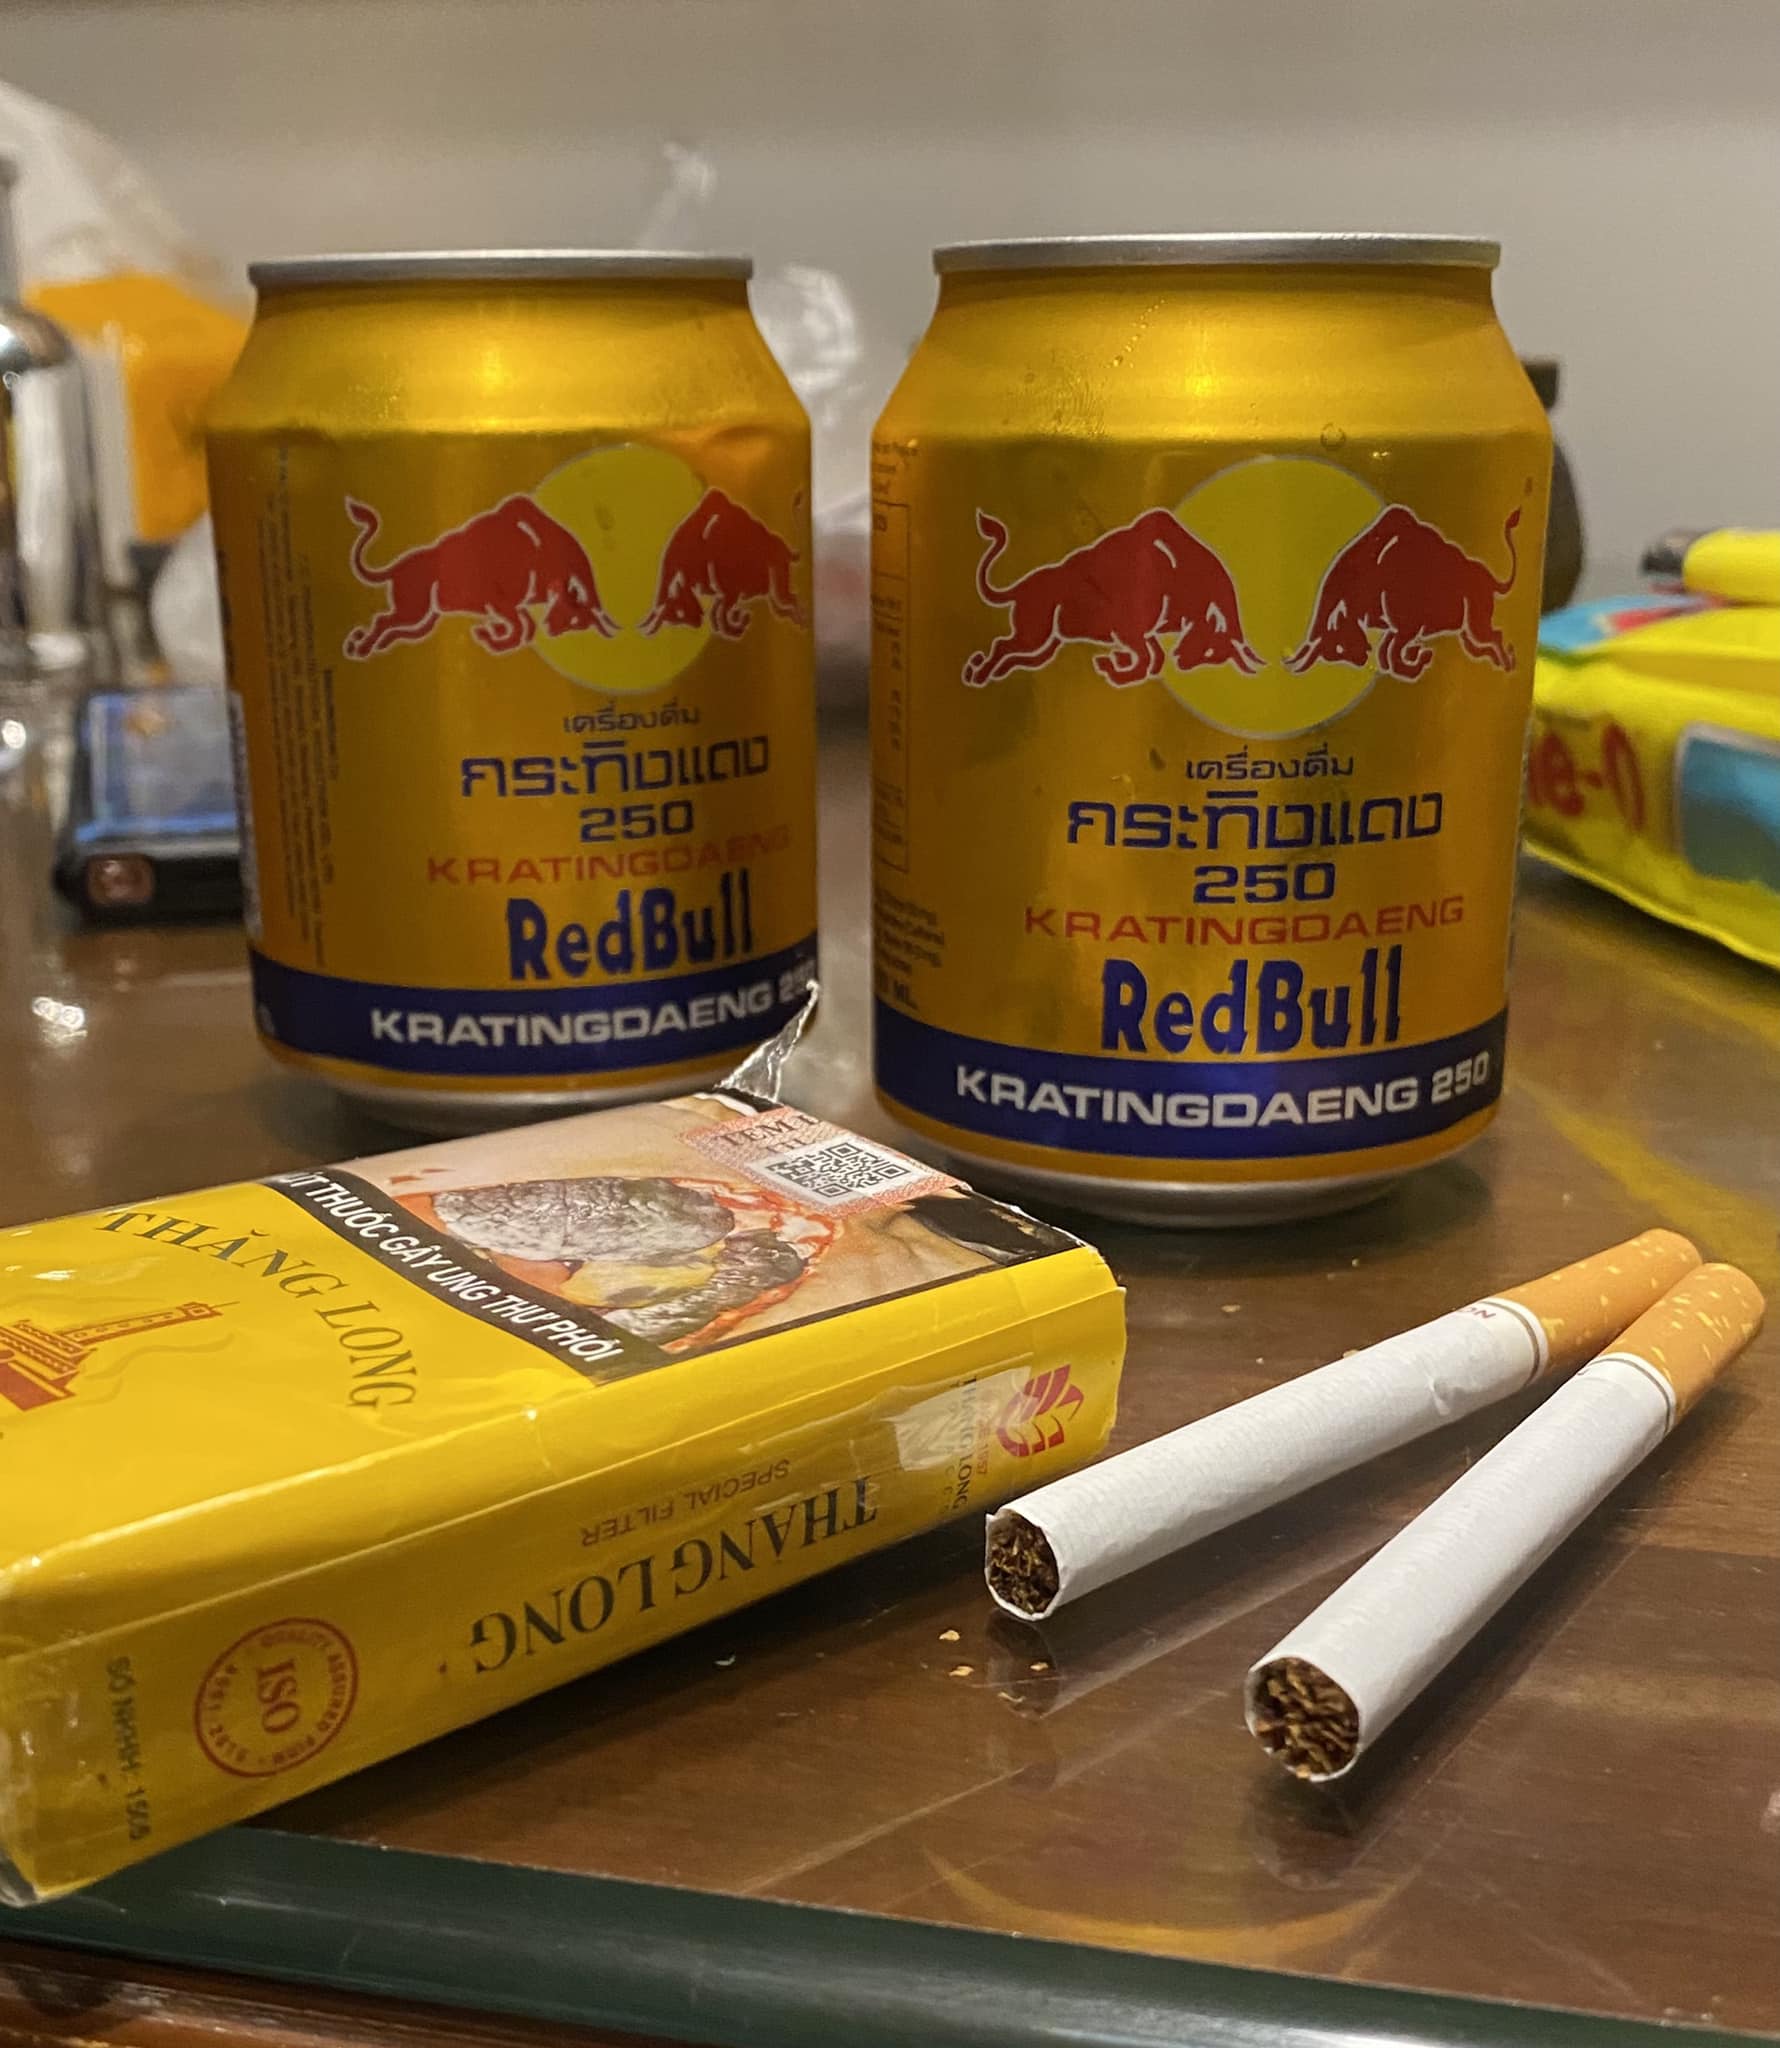 Two cans of Redbull mixed with cigarettes for breakfast